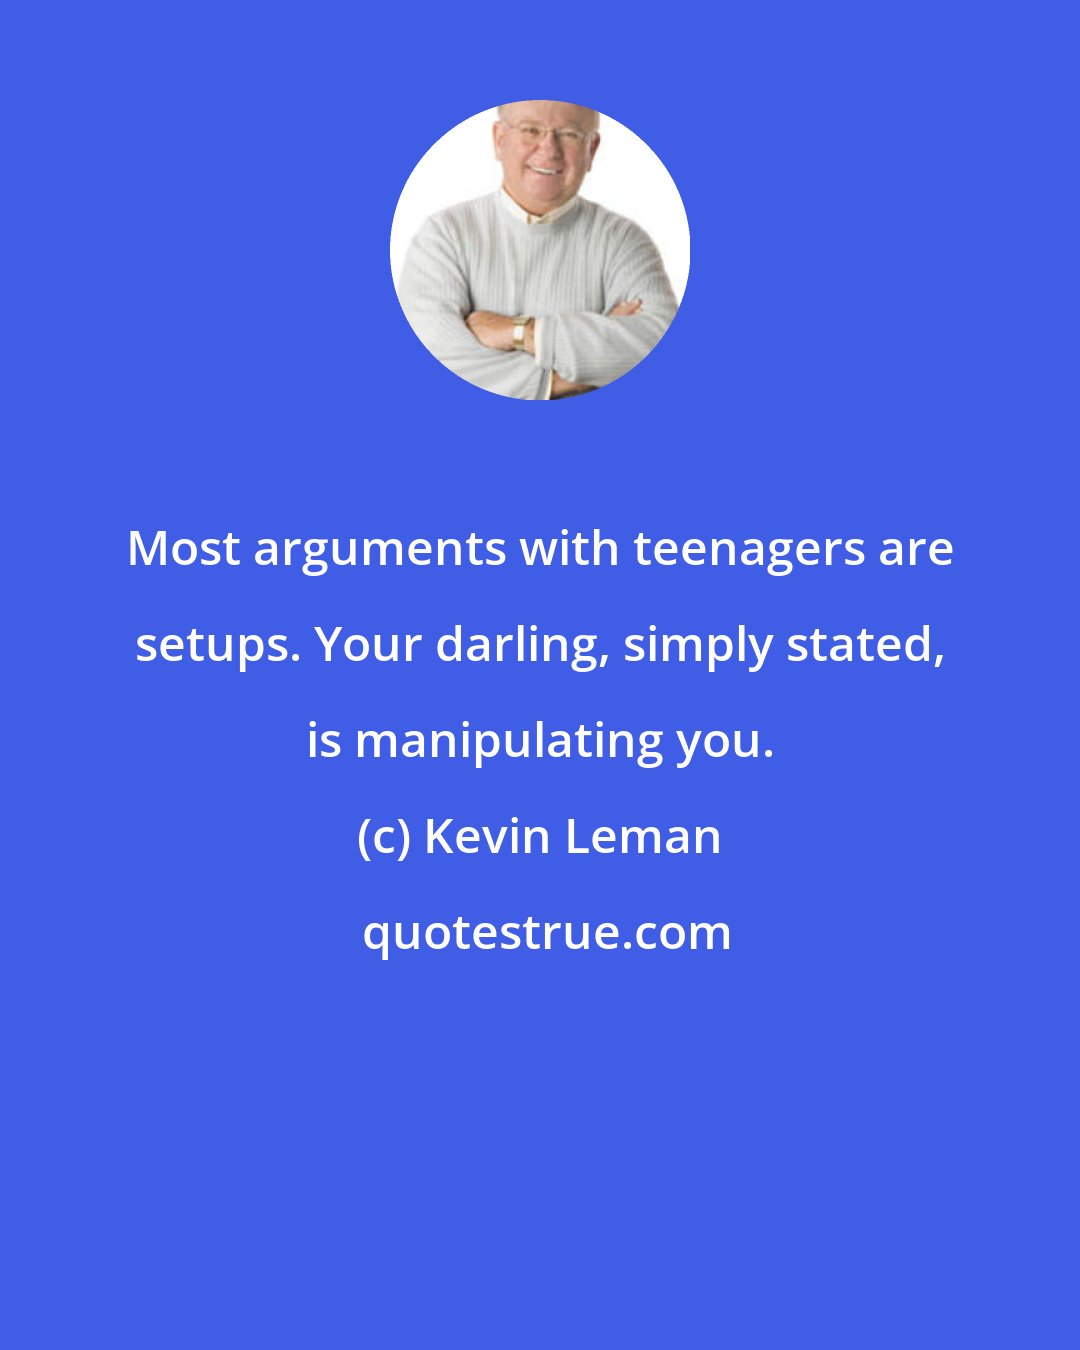 Kevin Leman: Most arguments with teenagers are setups. Your darling, simply stated, is manipulating you.